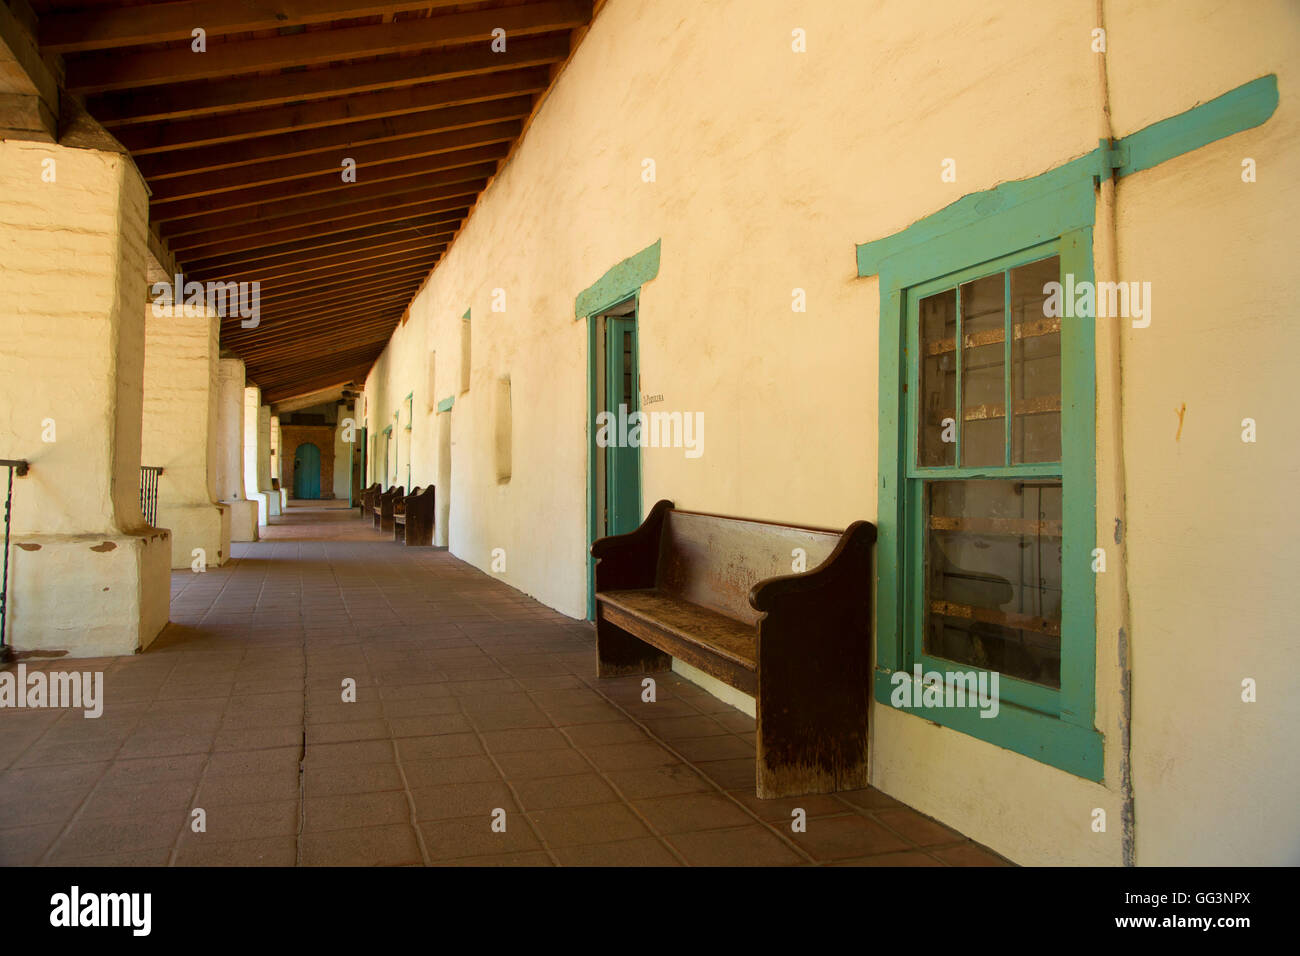 Spanish Mission Bench High Resolution Stock Photography And Images Alamy